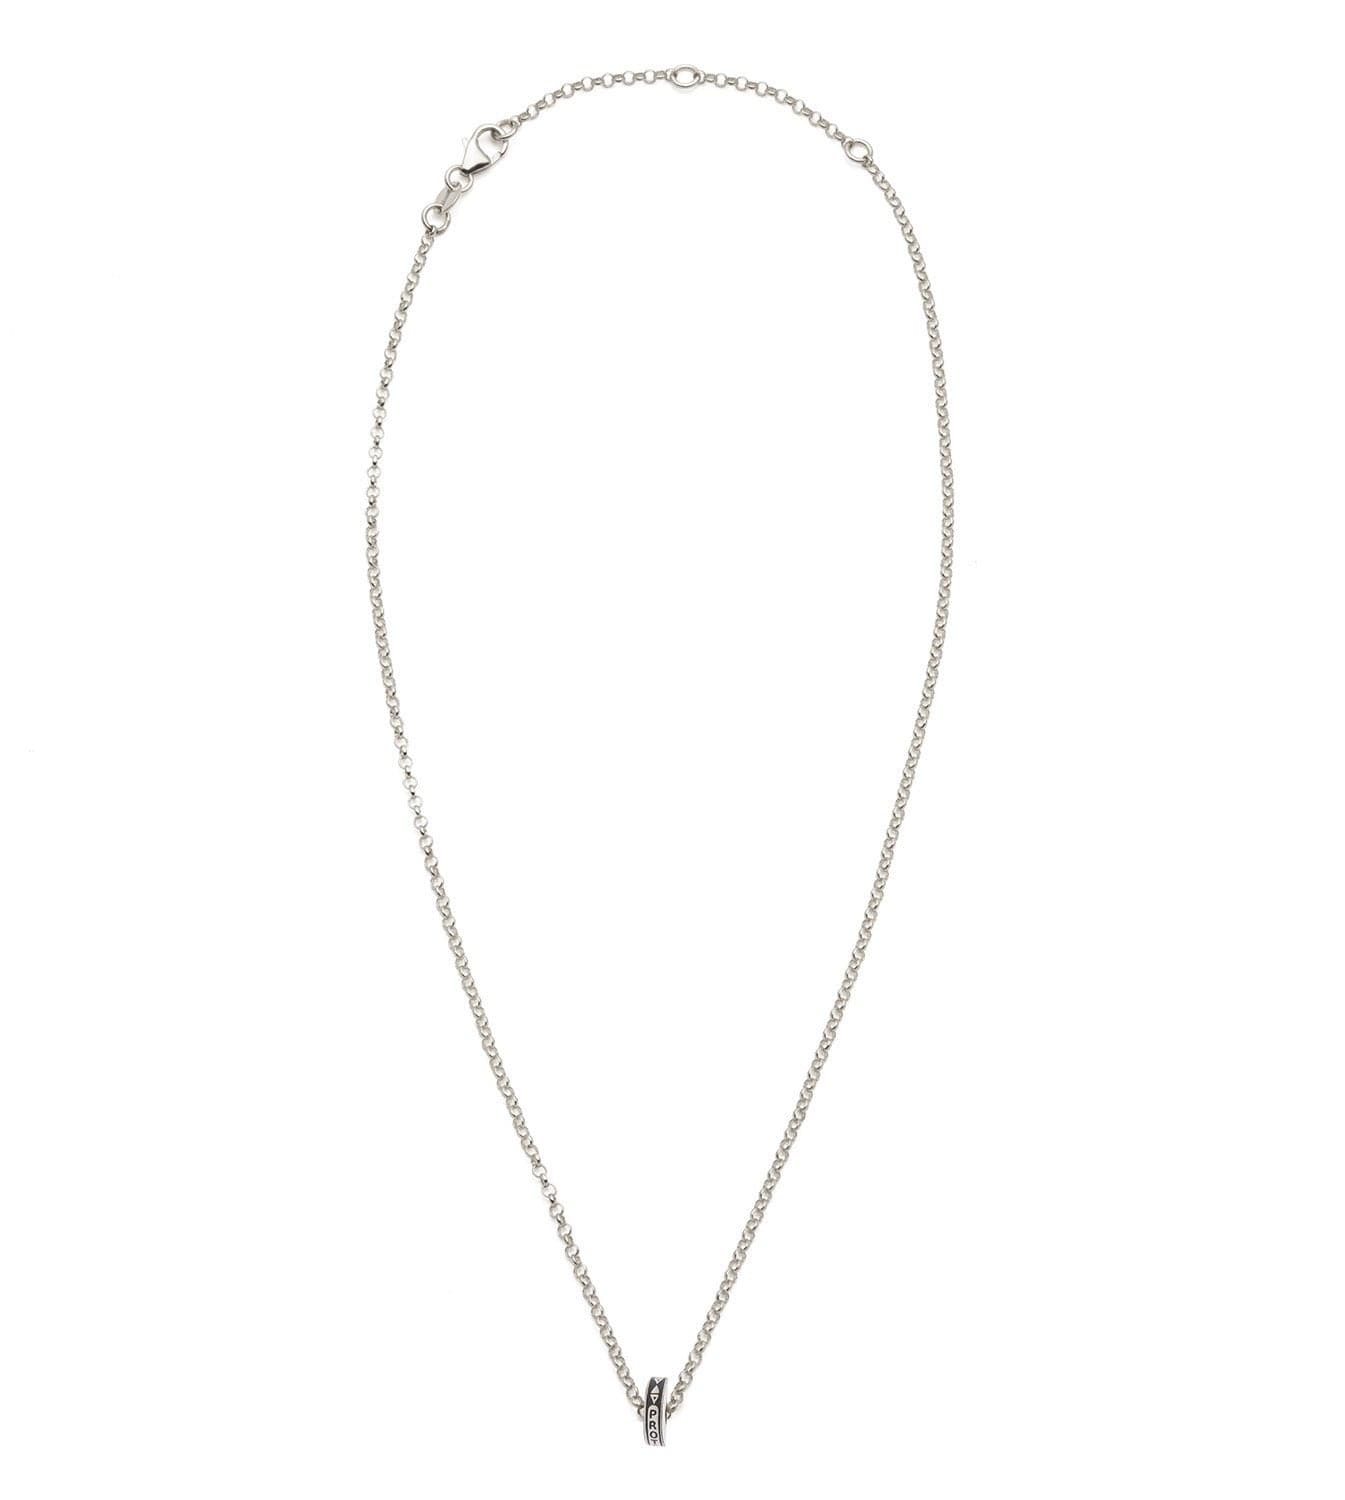 Protection : Heart Beat Fine Belcher Chain Necklace White Gold